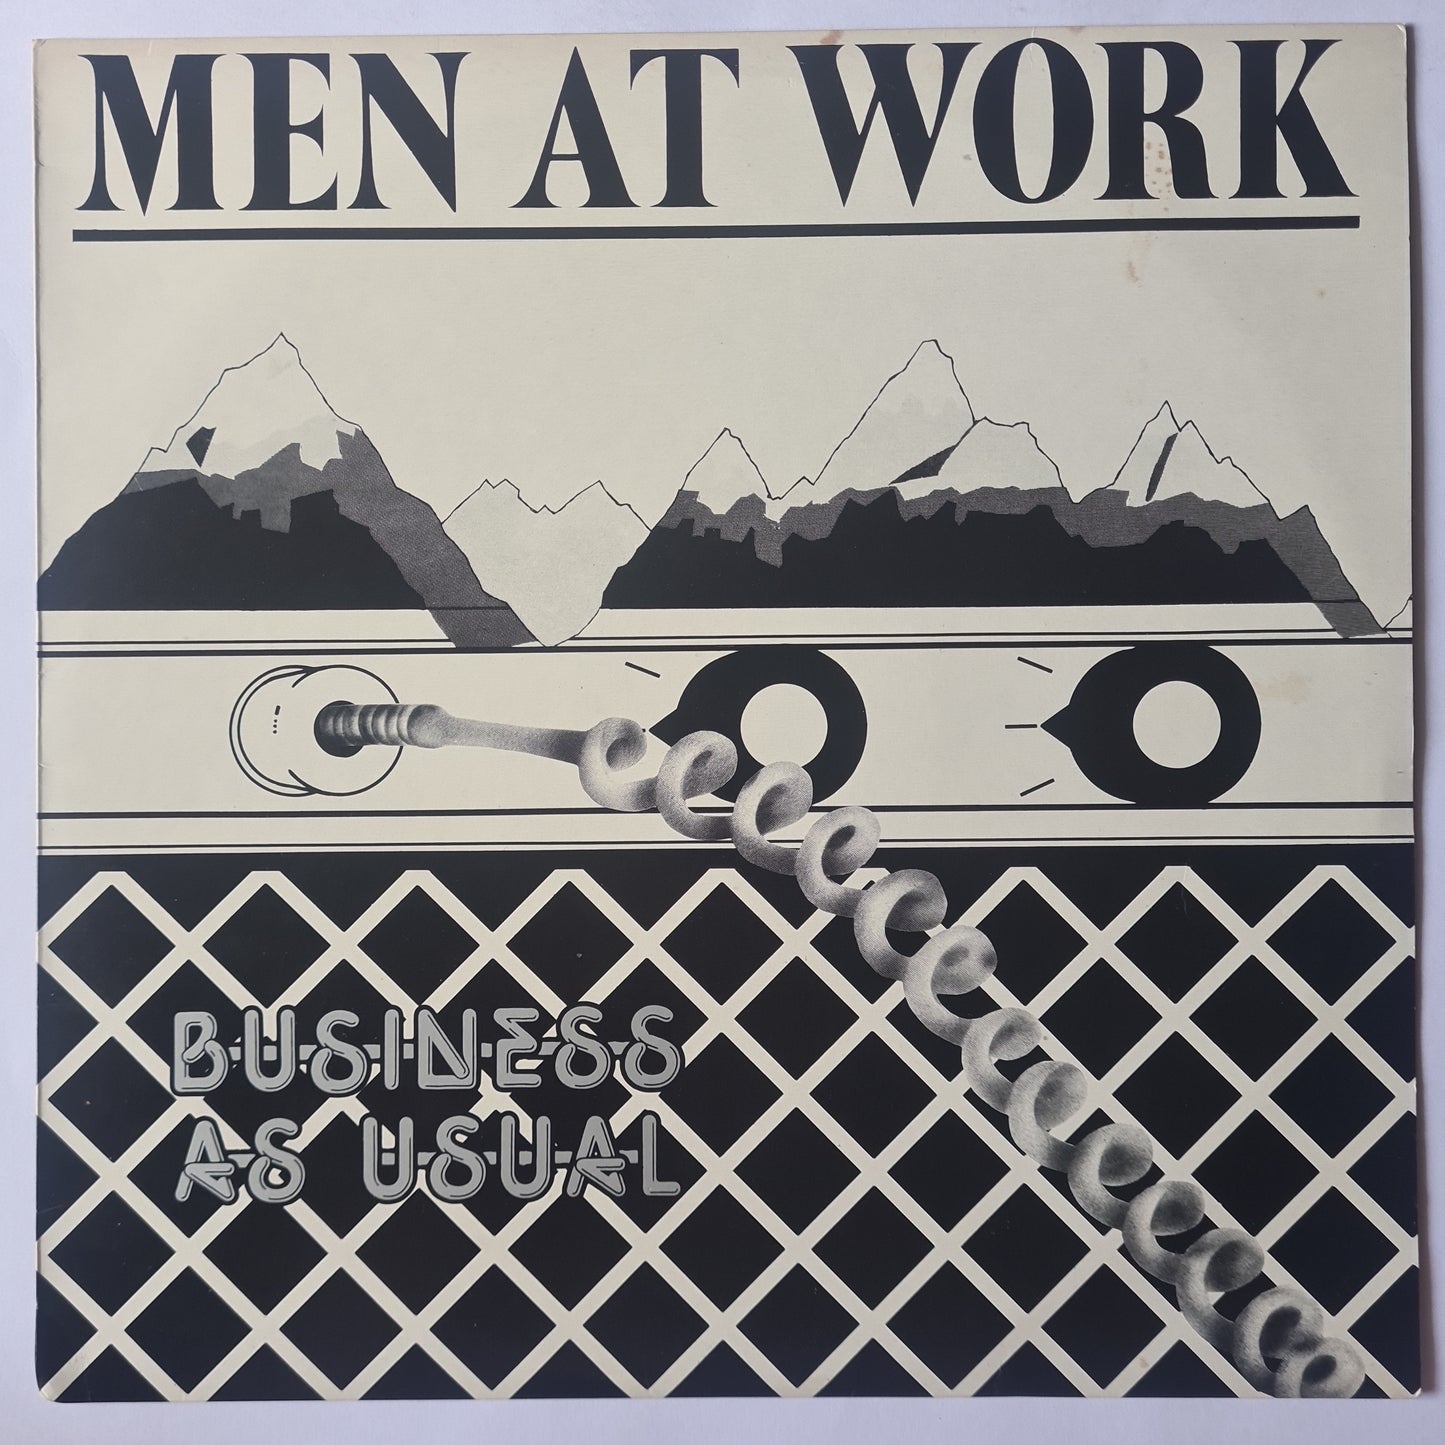 Men At Work – Business As Usual - 1981 - Vinyl Record